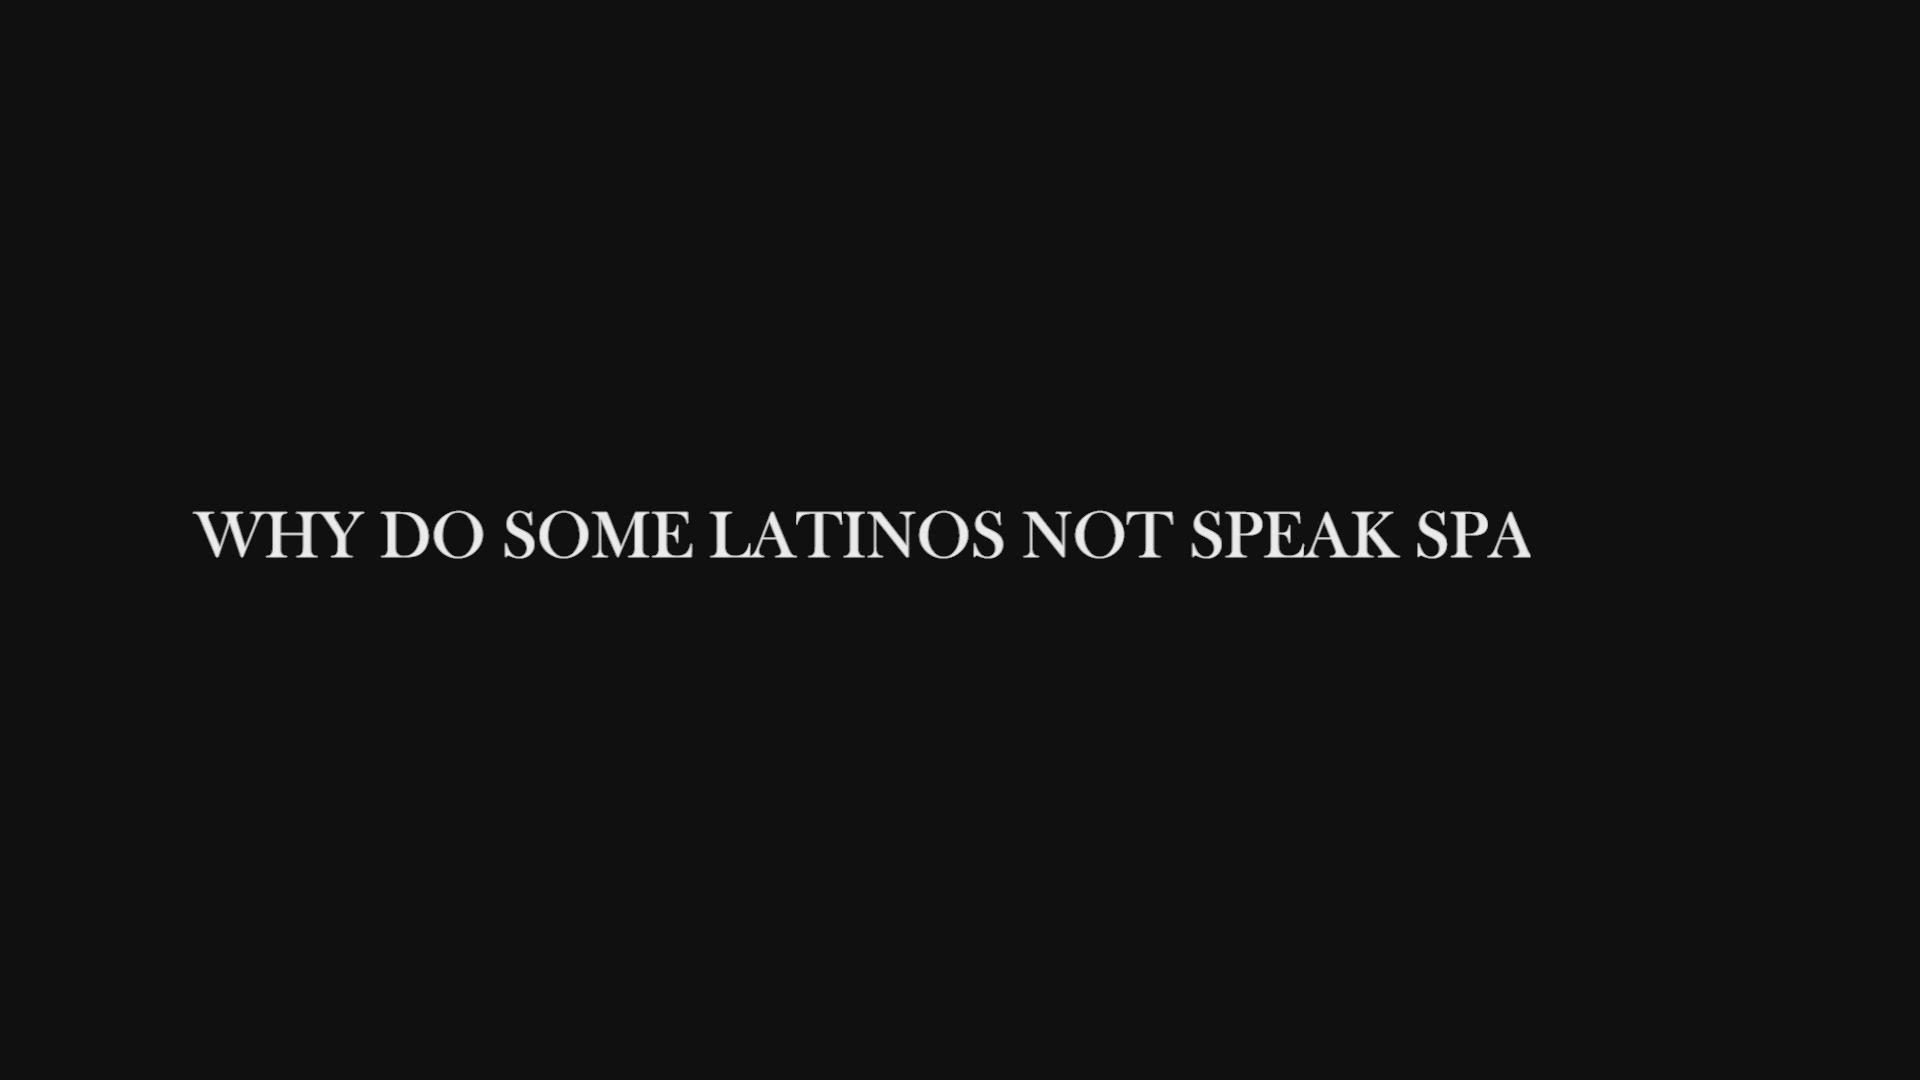 Many Latinos experience ridicule because they don't speak Spanish, but there's a deeper history as to why so many Hispanic people lost their language.